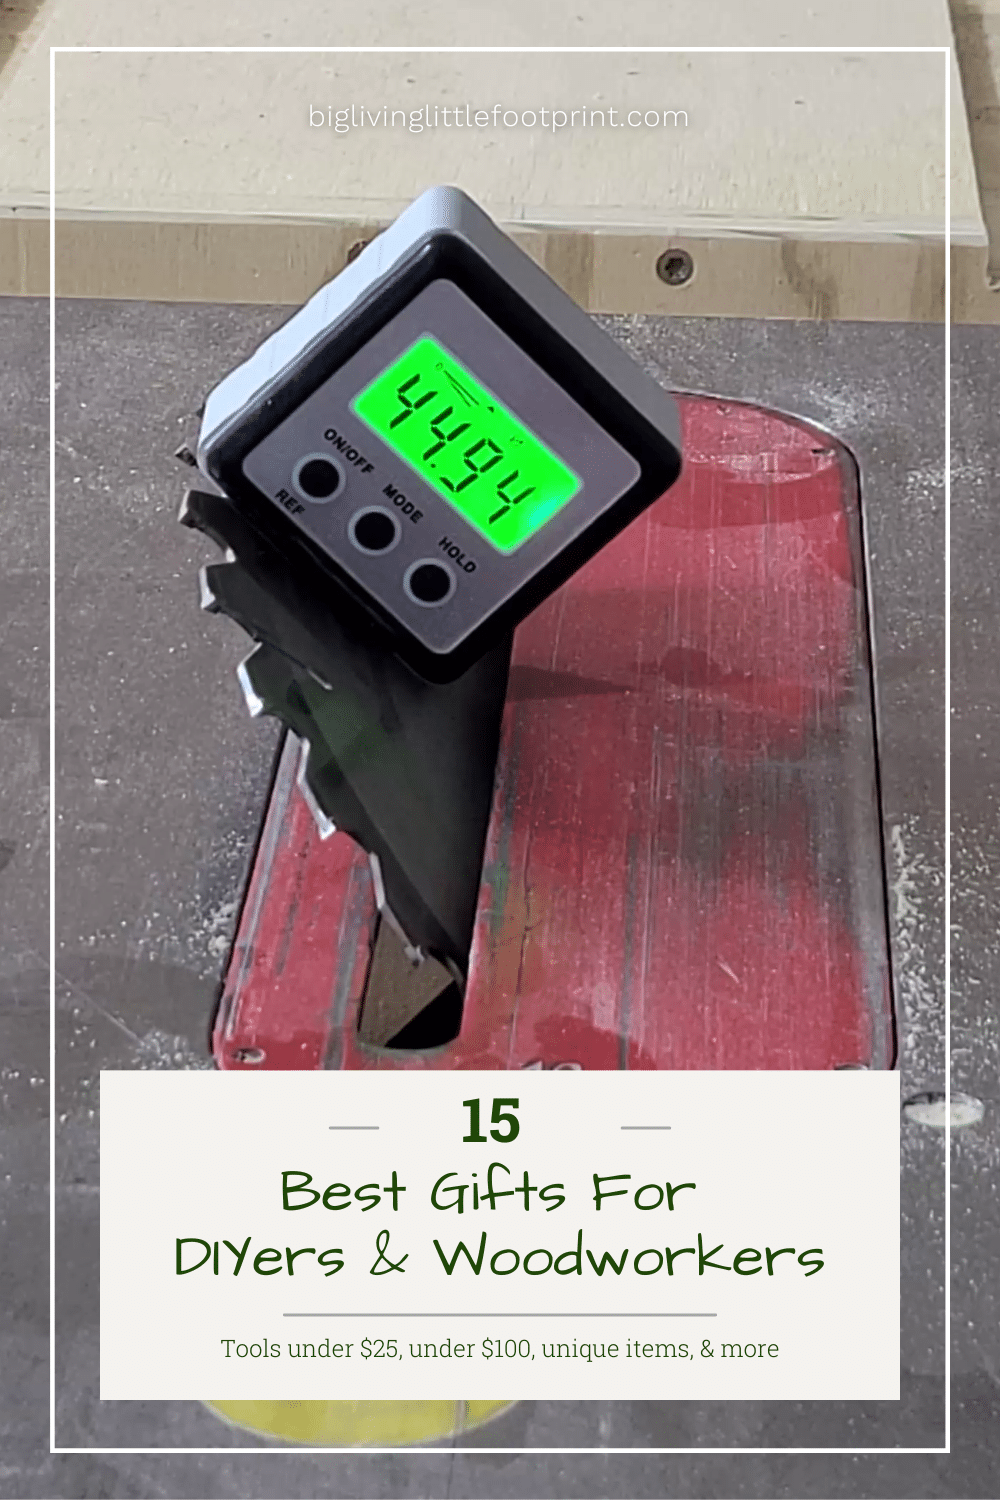 15 Best Gifts For DIYers and Woodworkers